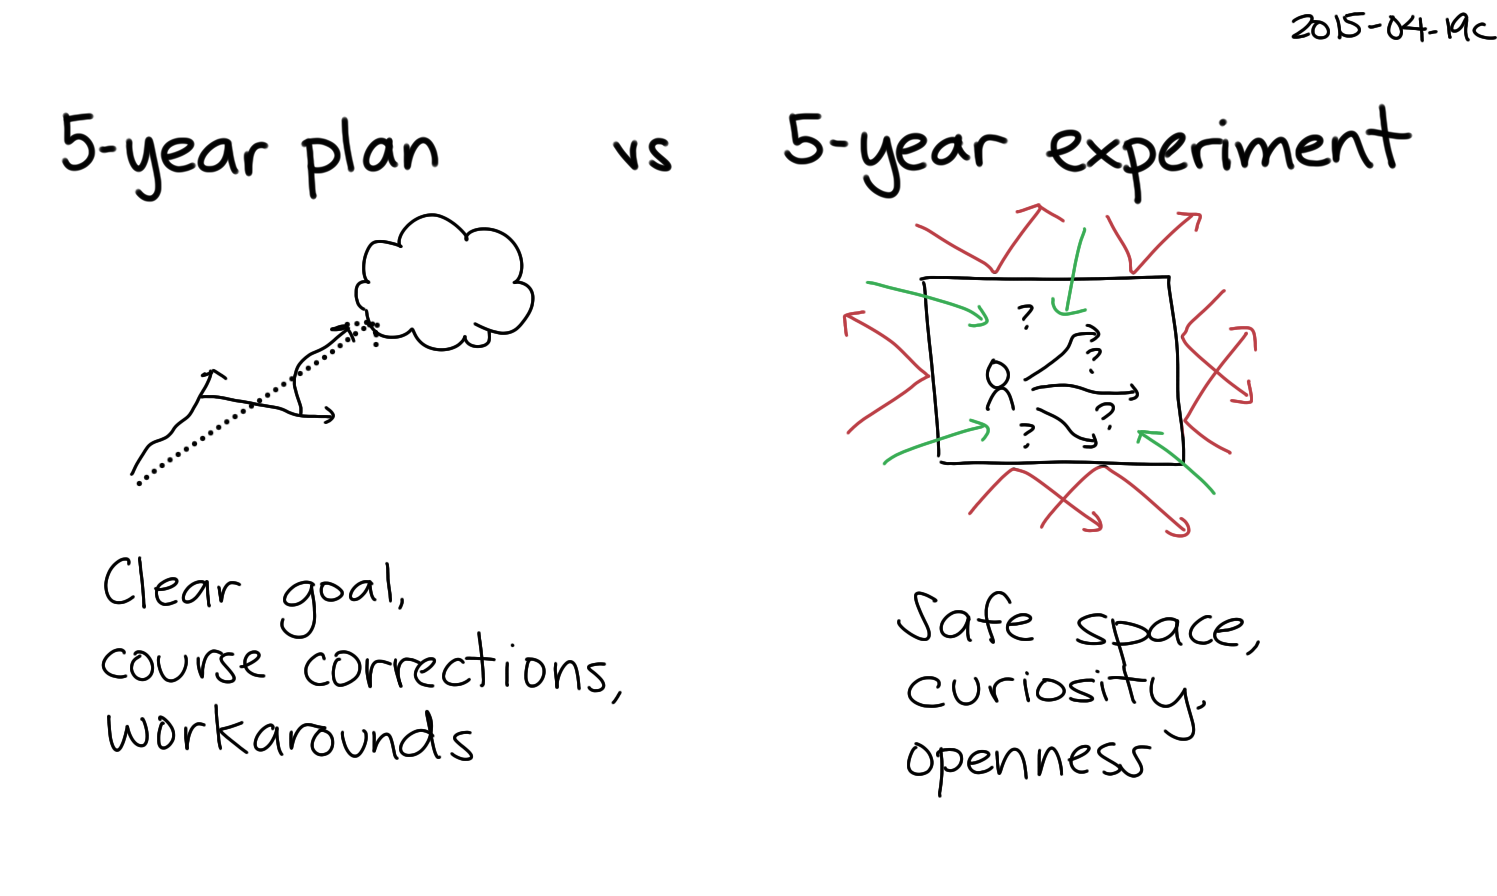 2015-04-19c 5-year plan vs 5-year experiment -- index card #experiment.png